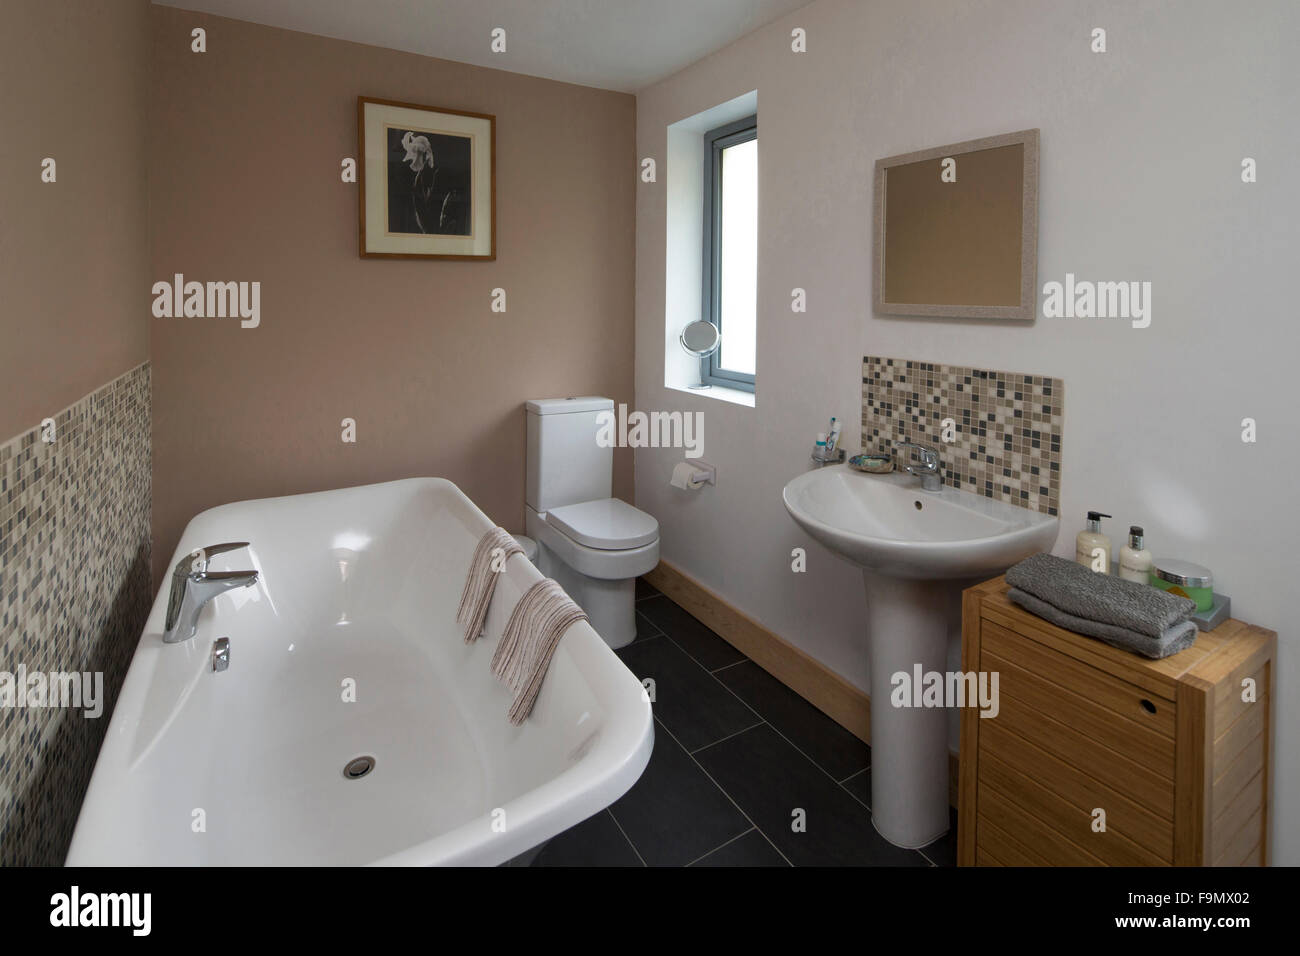 Family bathroom in a moder house, with a traditional bath, handbasin and toilet. Stock Photo